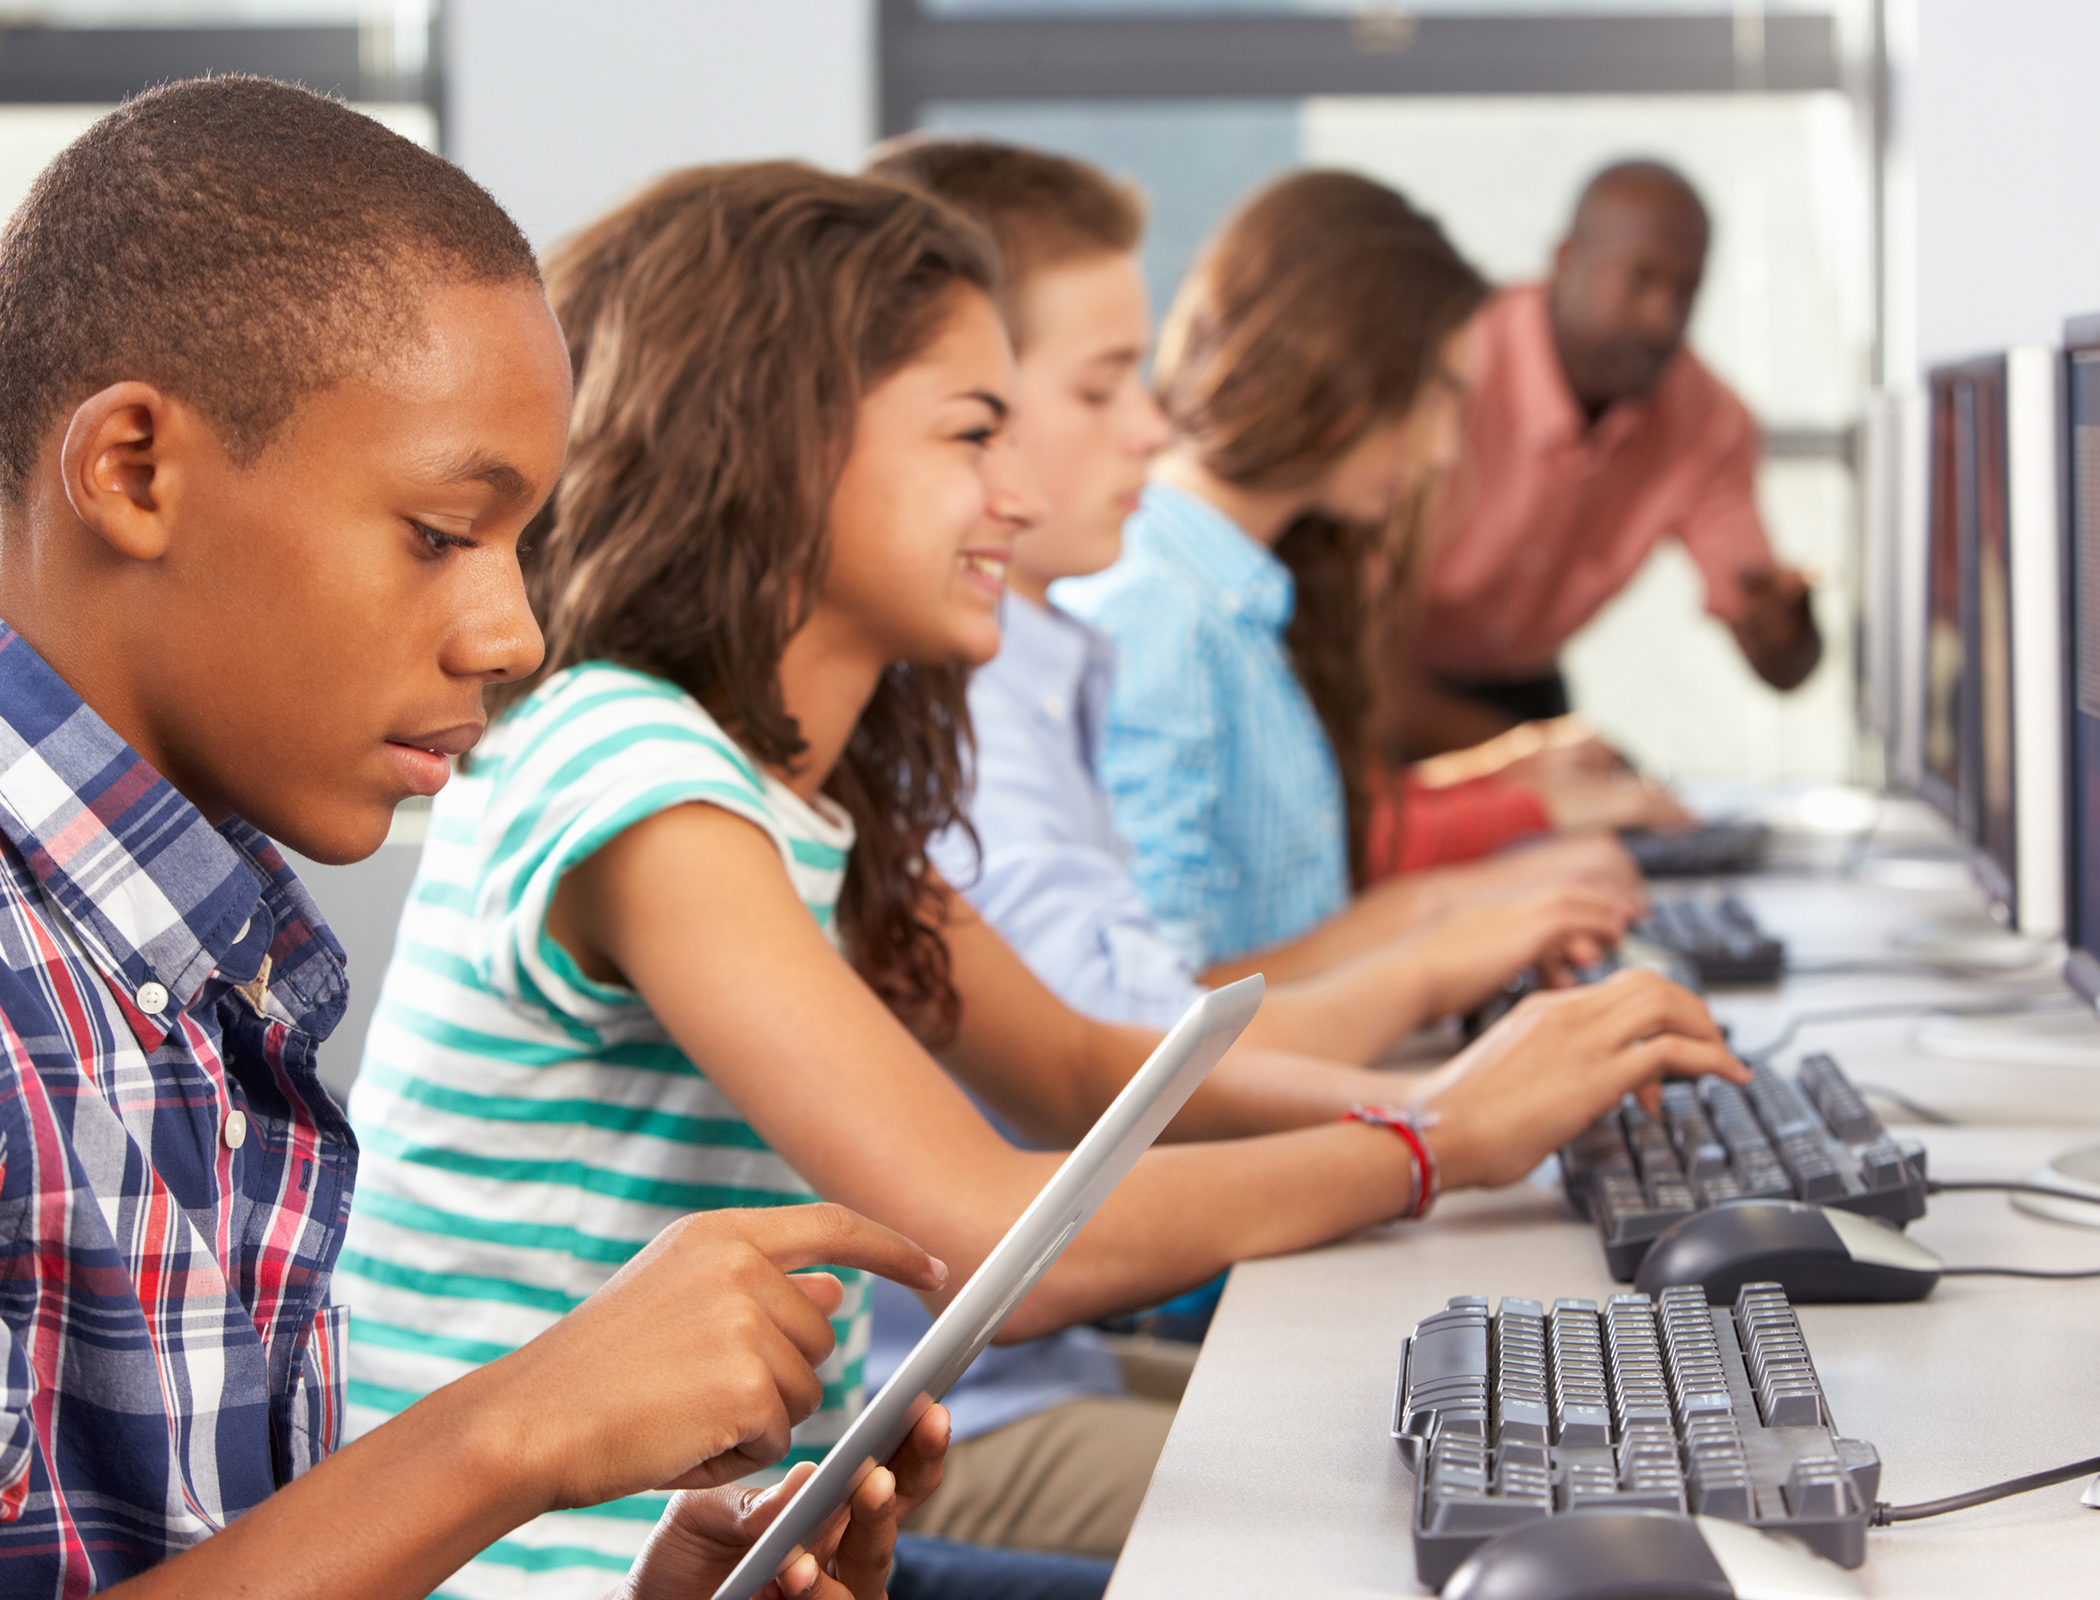 Mock digital exam trials to take place in UK schools